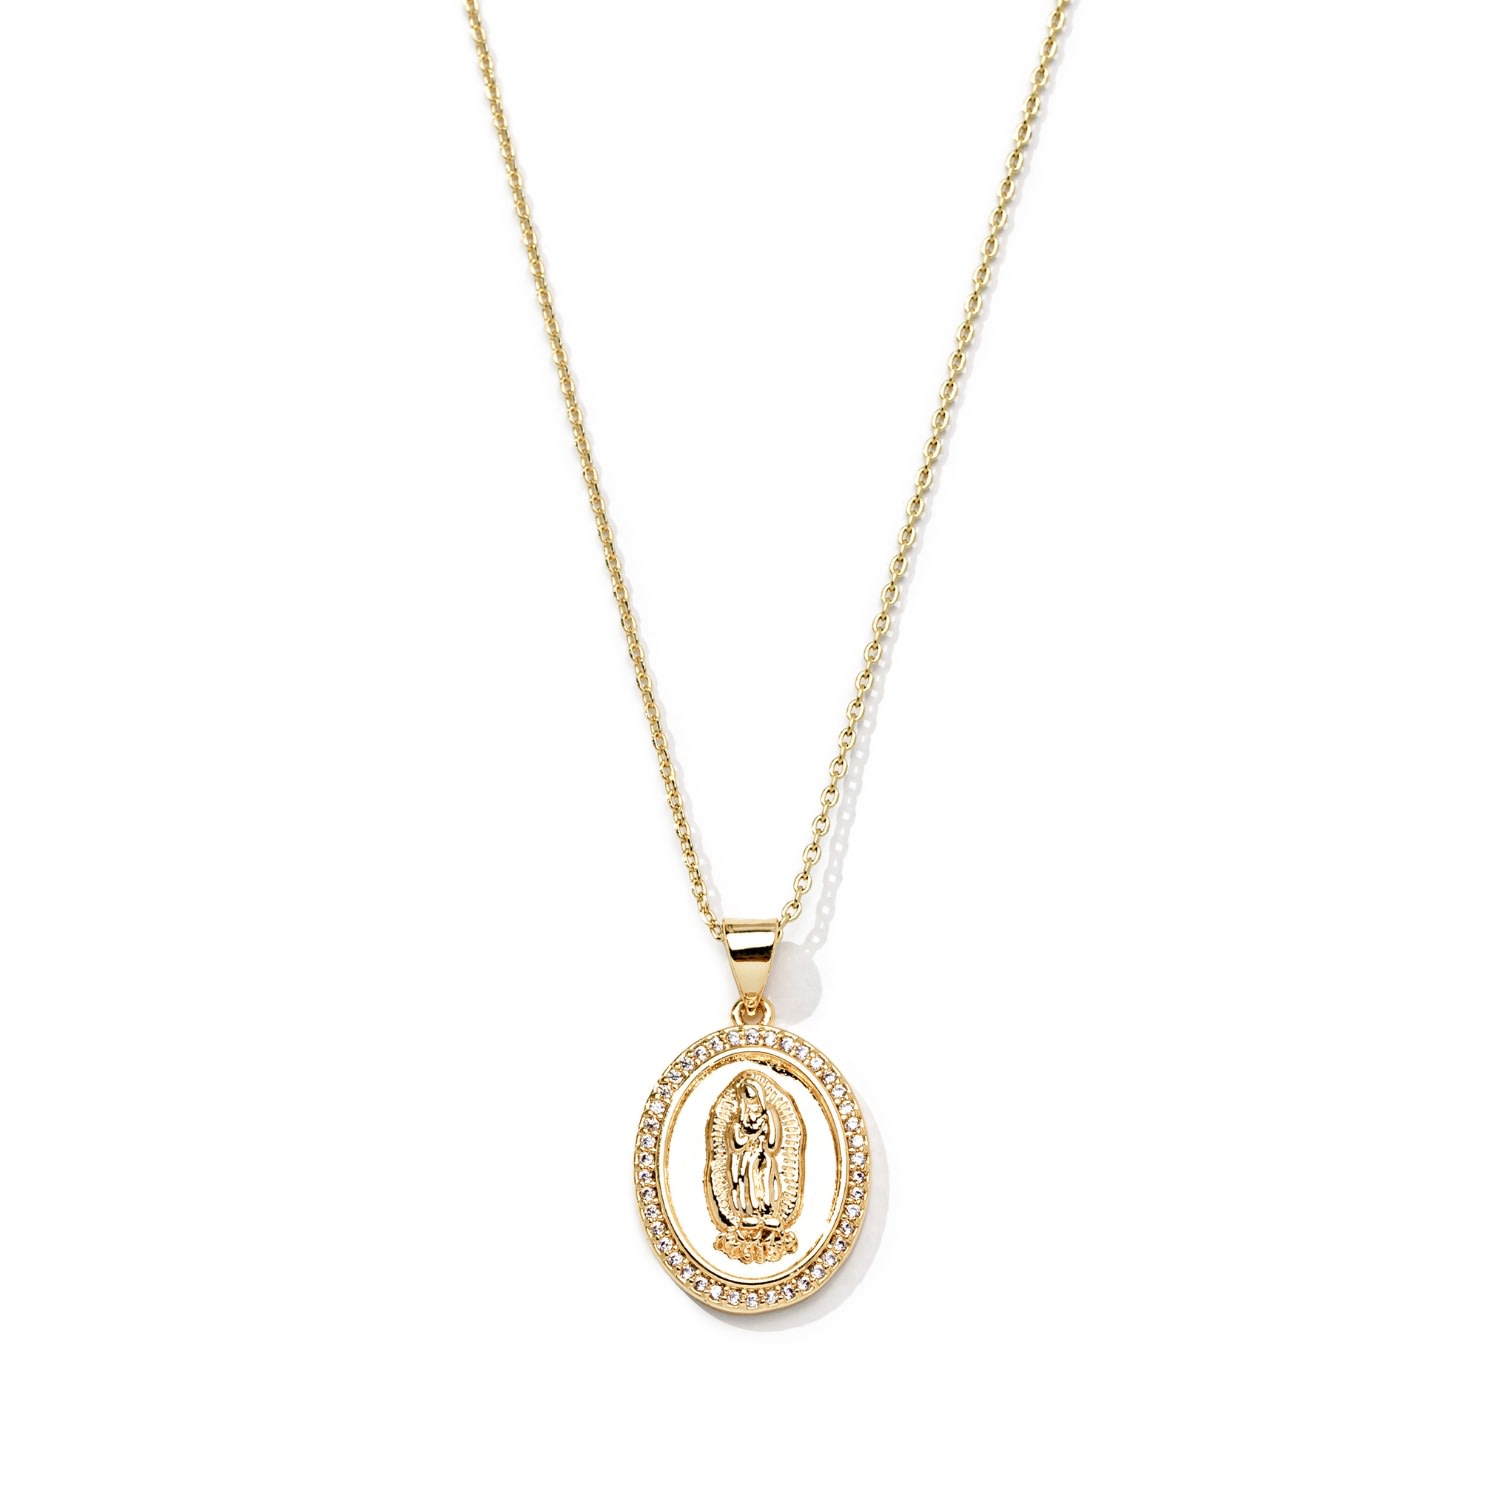 Women's Gold Filled Miraculous Mary Pendant Necklace The Essential Jewels